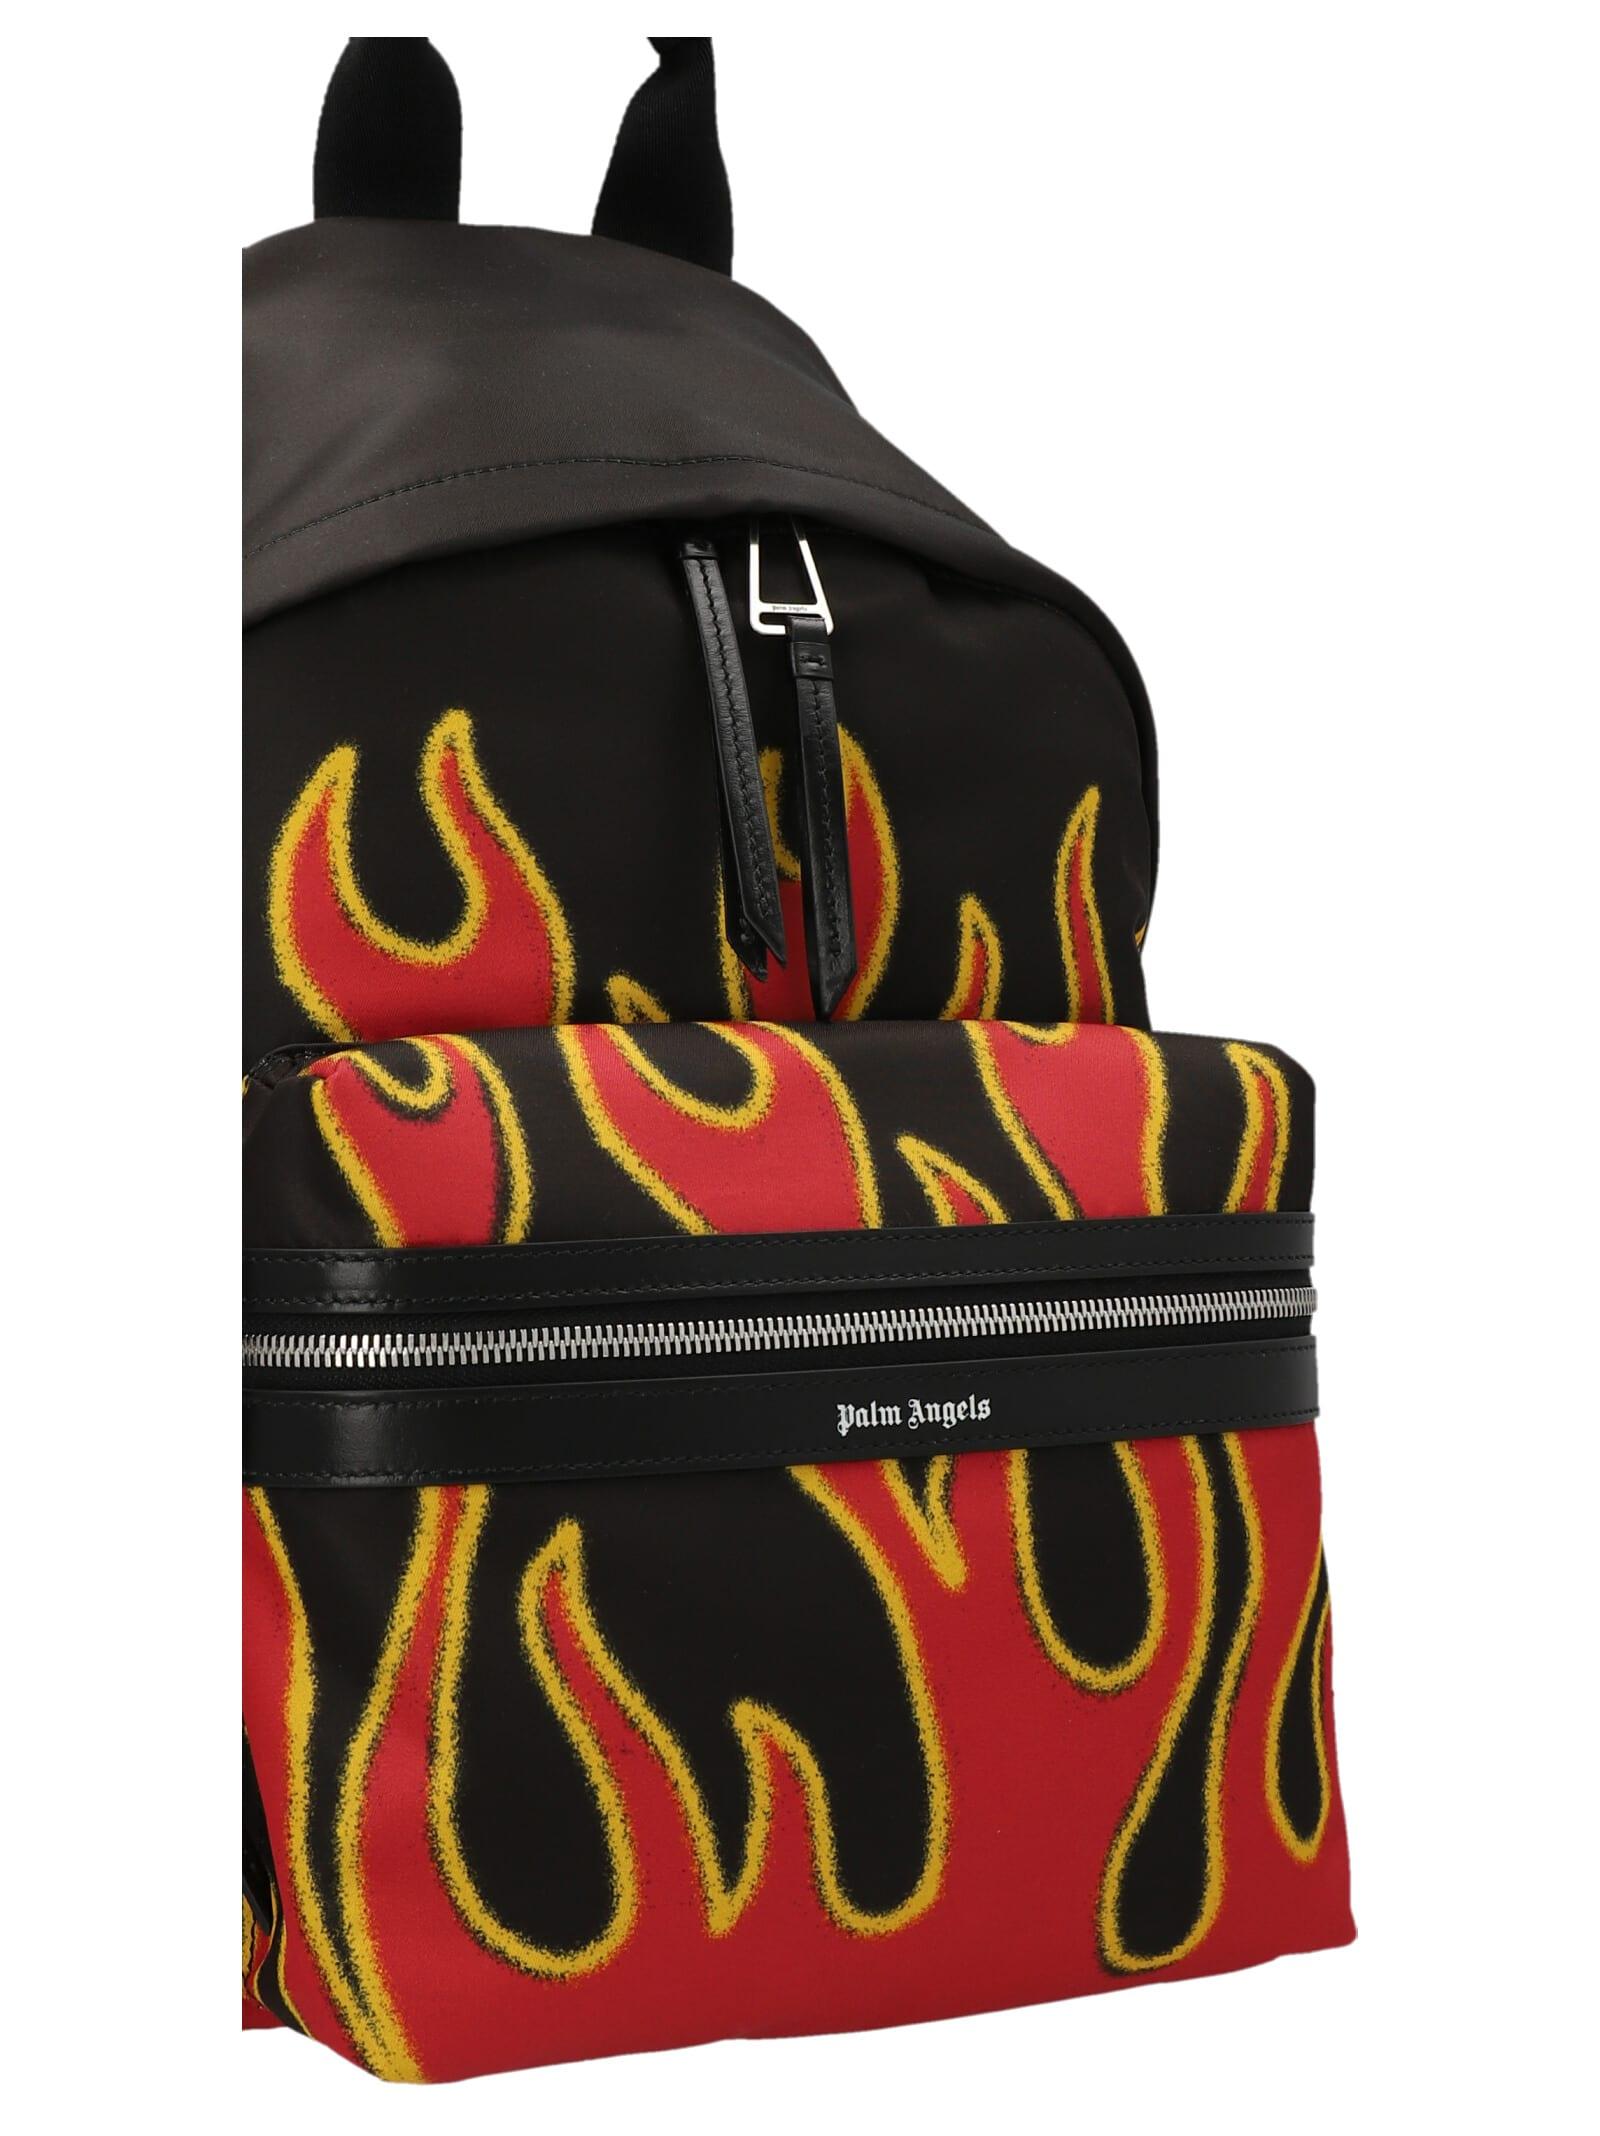 Palm Angels Synthetic Flames Backpack in Black Mens Bags Backpacks for Men Red Save 52% 